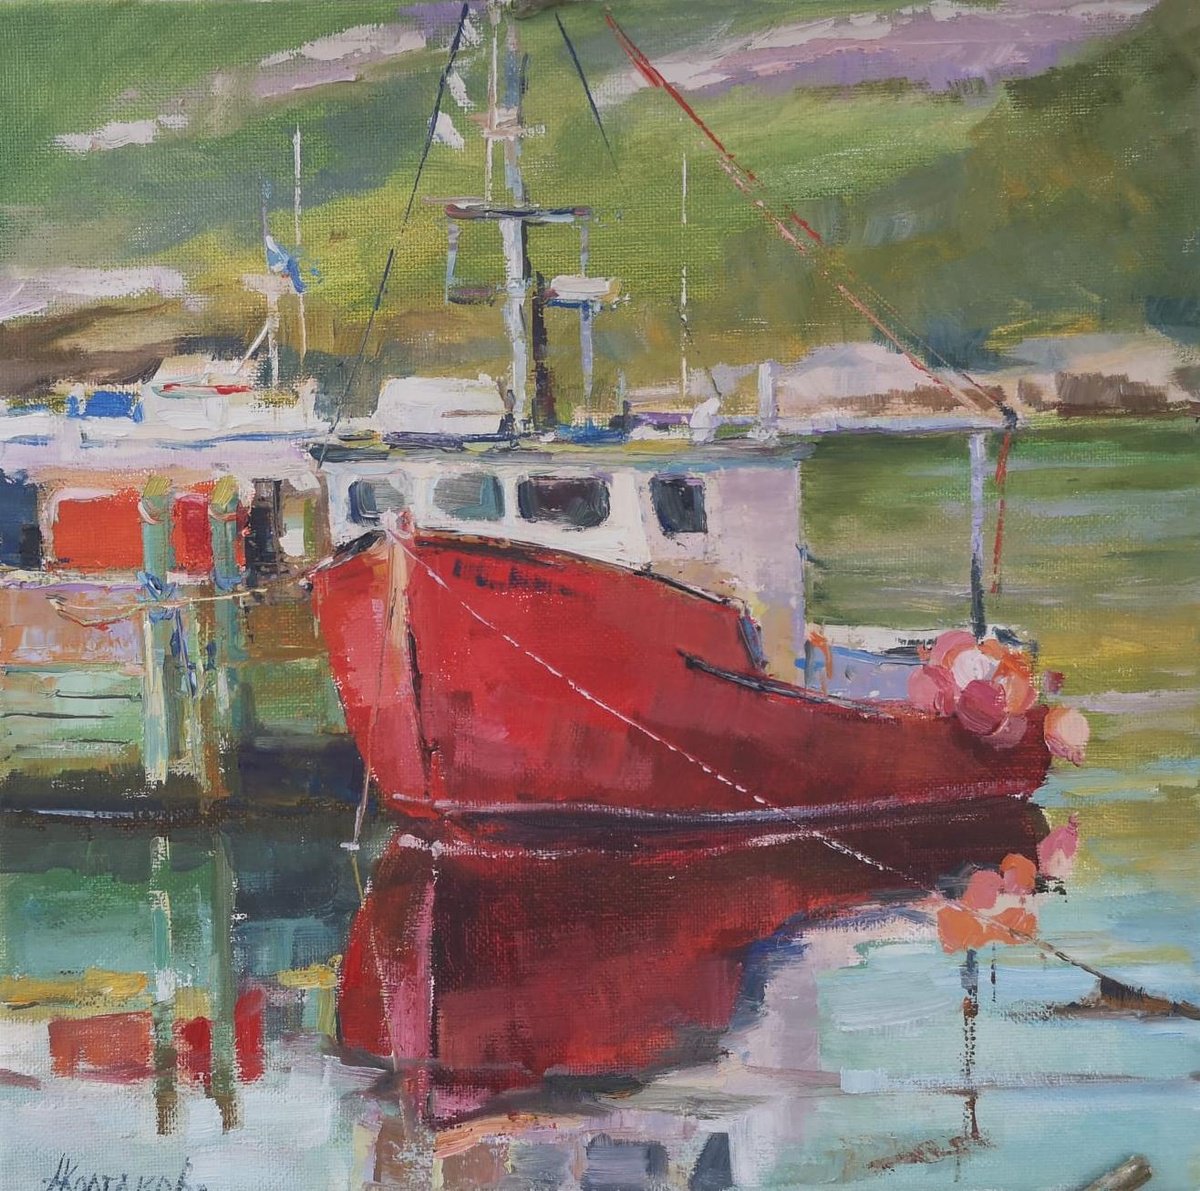 Red boat , plein air, original, one of a kind, oil on canvas painting, 12x12’’ by Alexander Koltakov